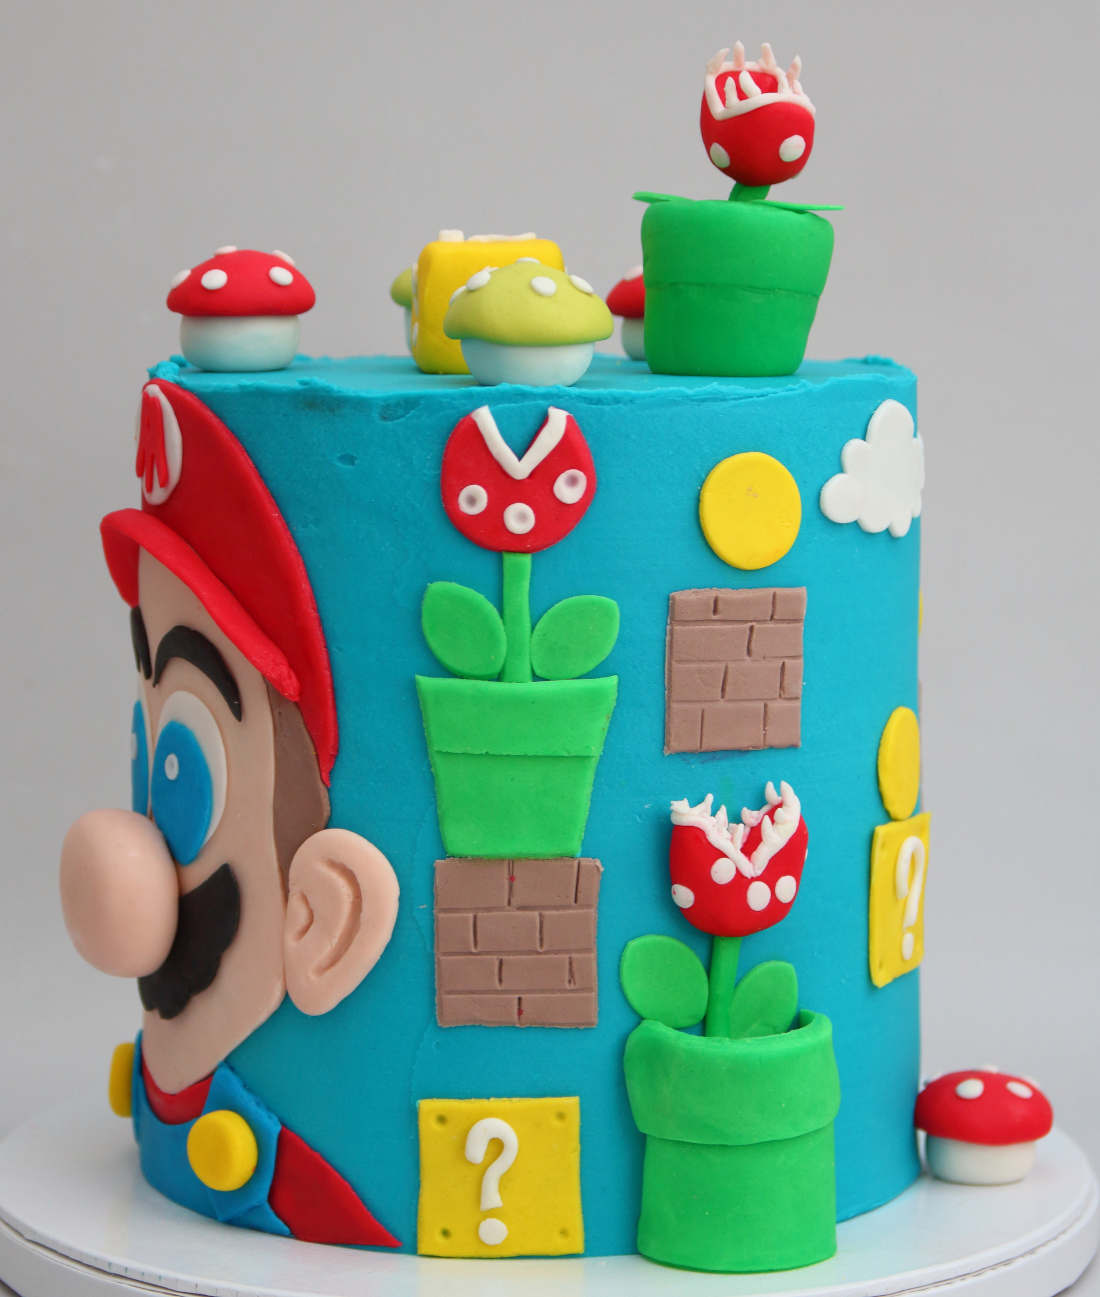 Cake with computer and console game Mario